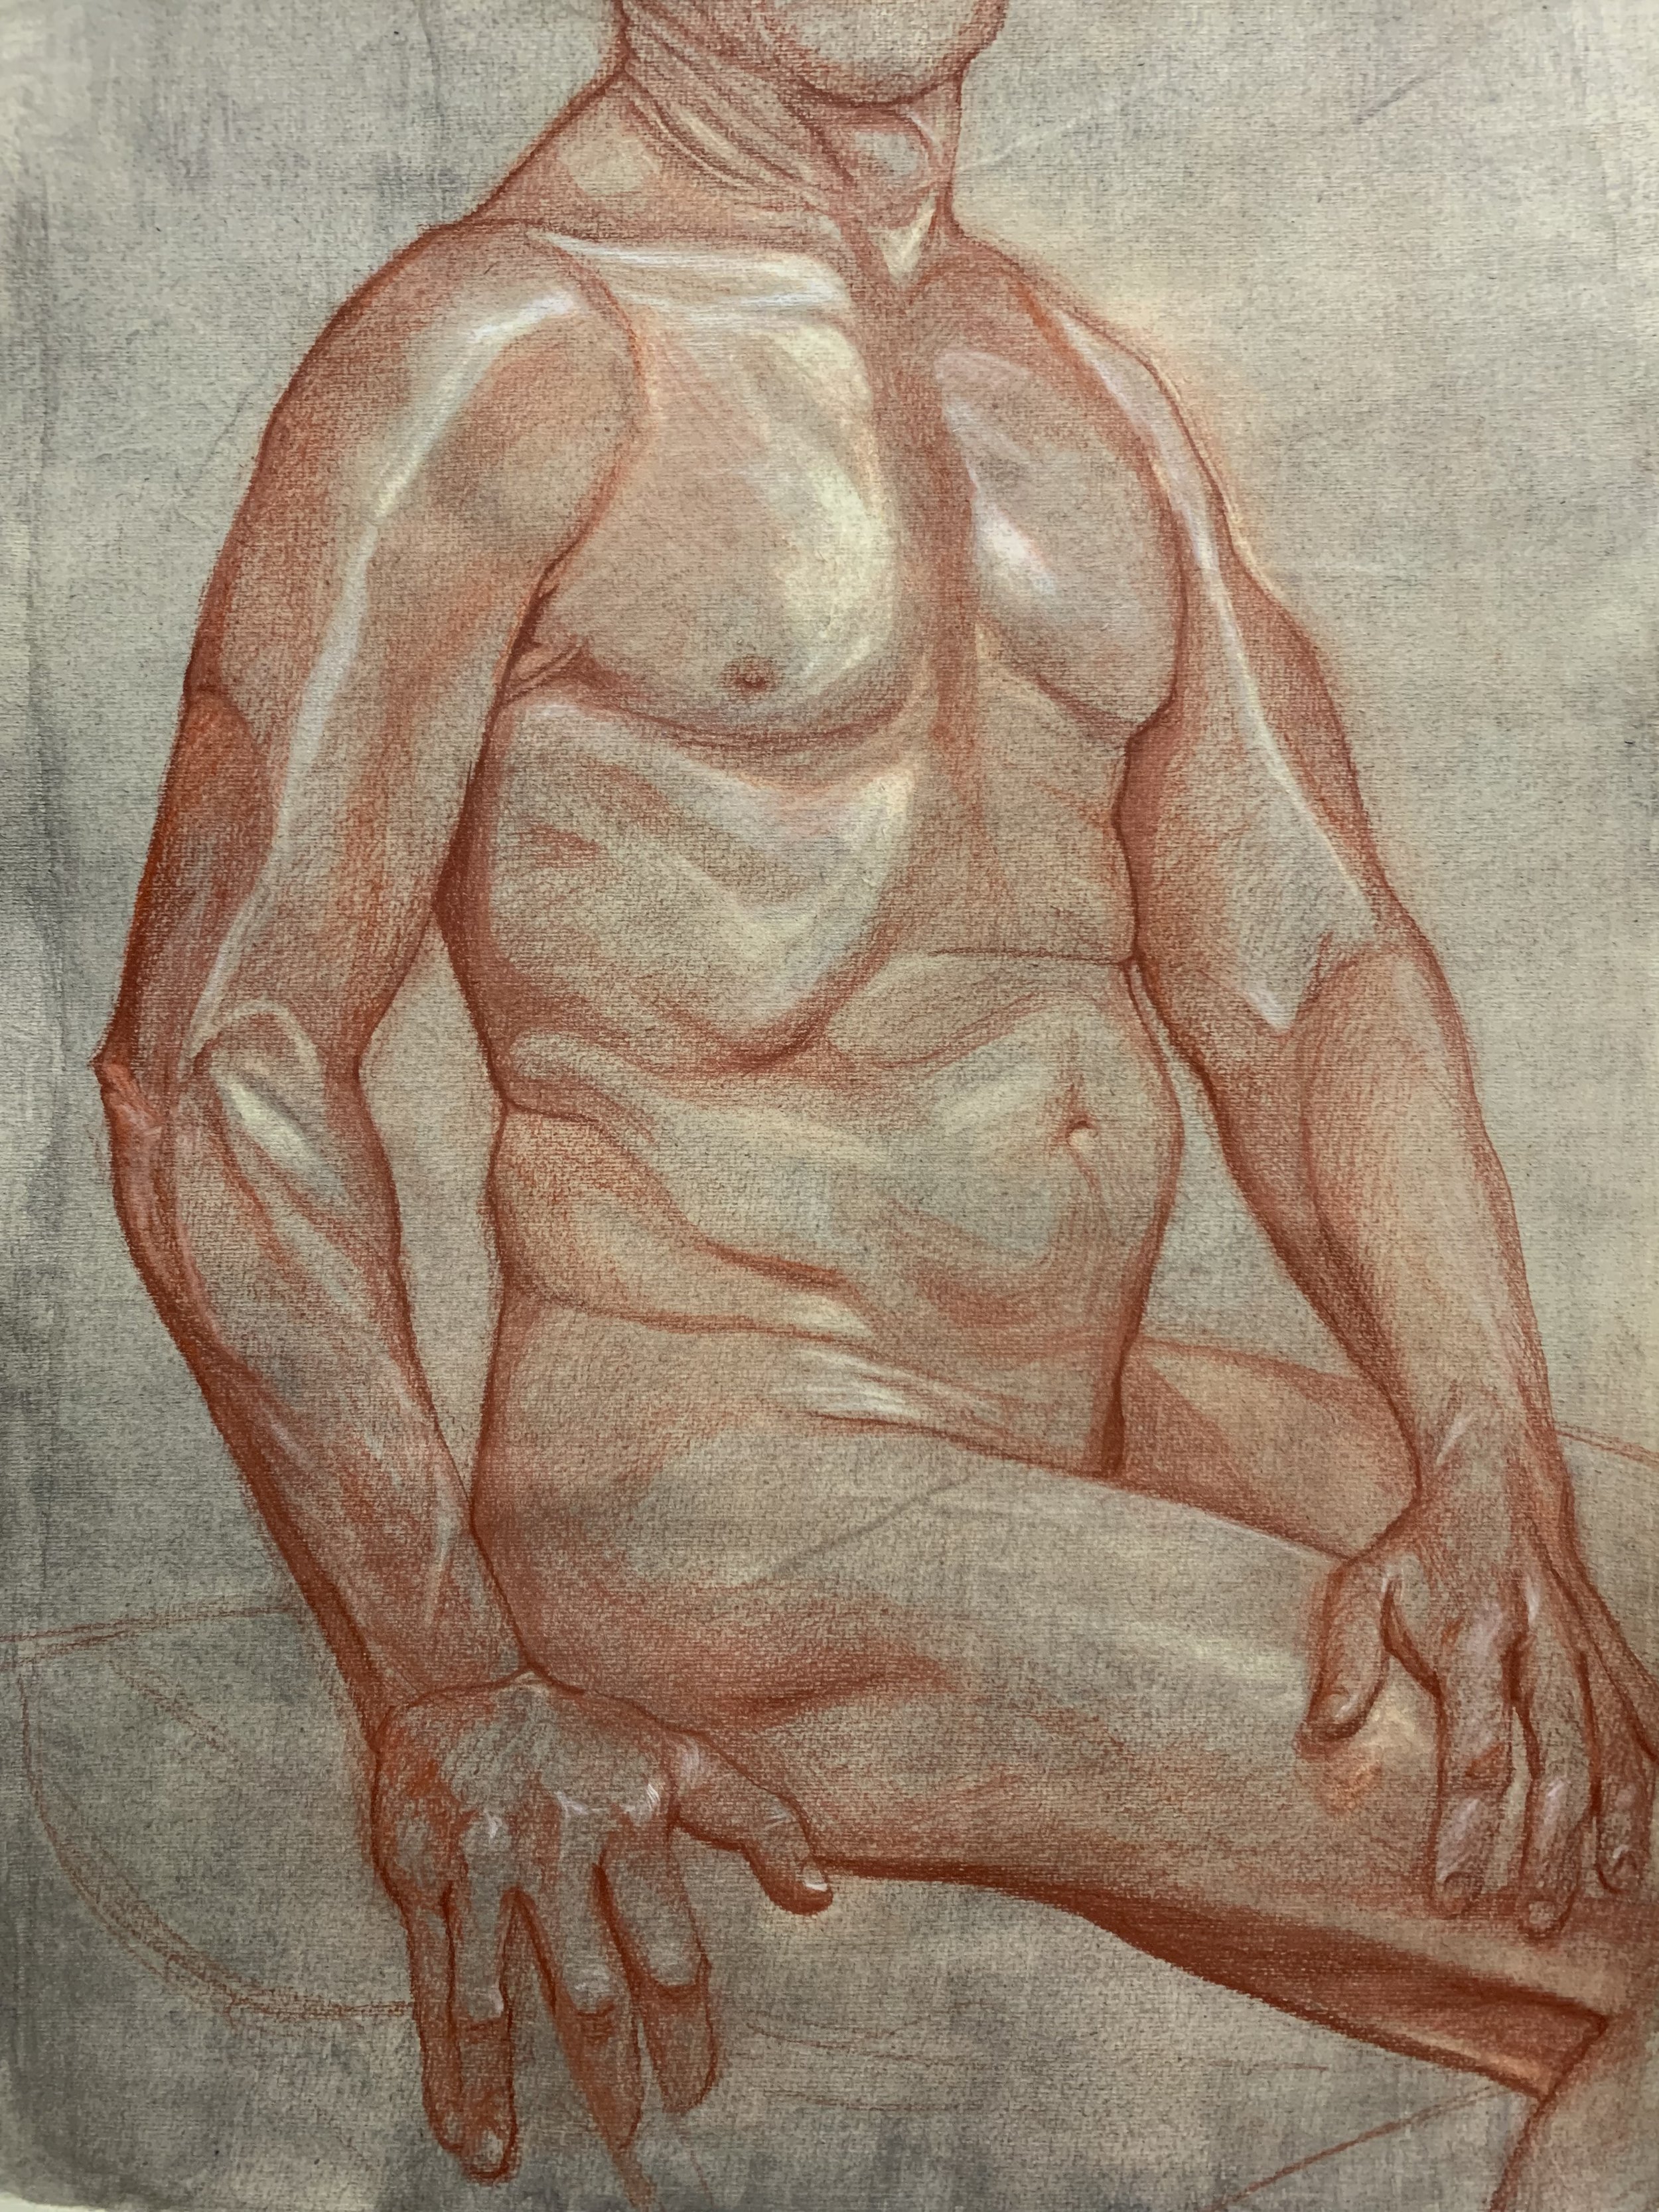  1 day figure drawing session from life, red chalk on hand-toned paper, 18x24”, 2021.  